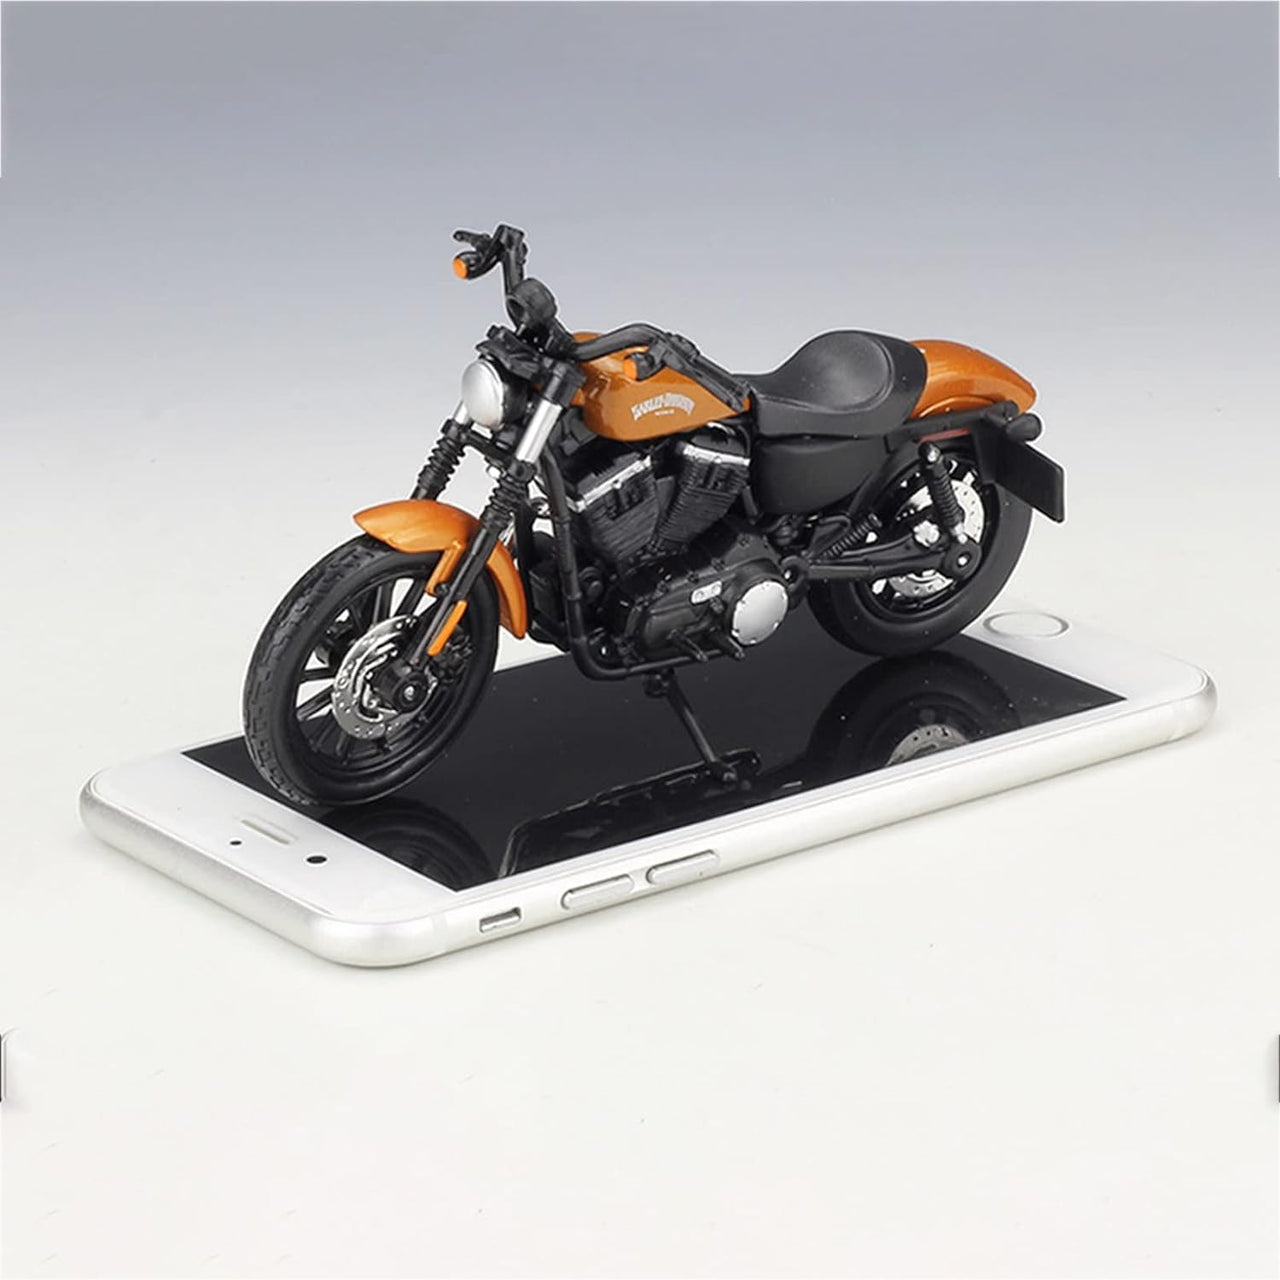 1:12 Scale 2015 Harley-Davidson Diecast Motorcycle